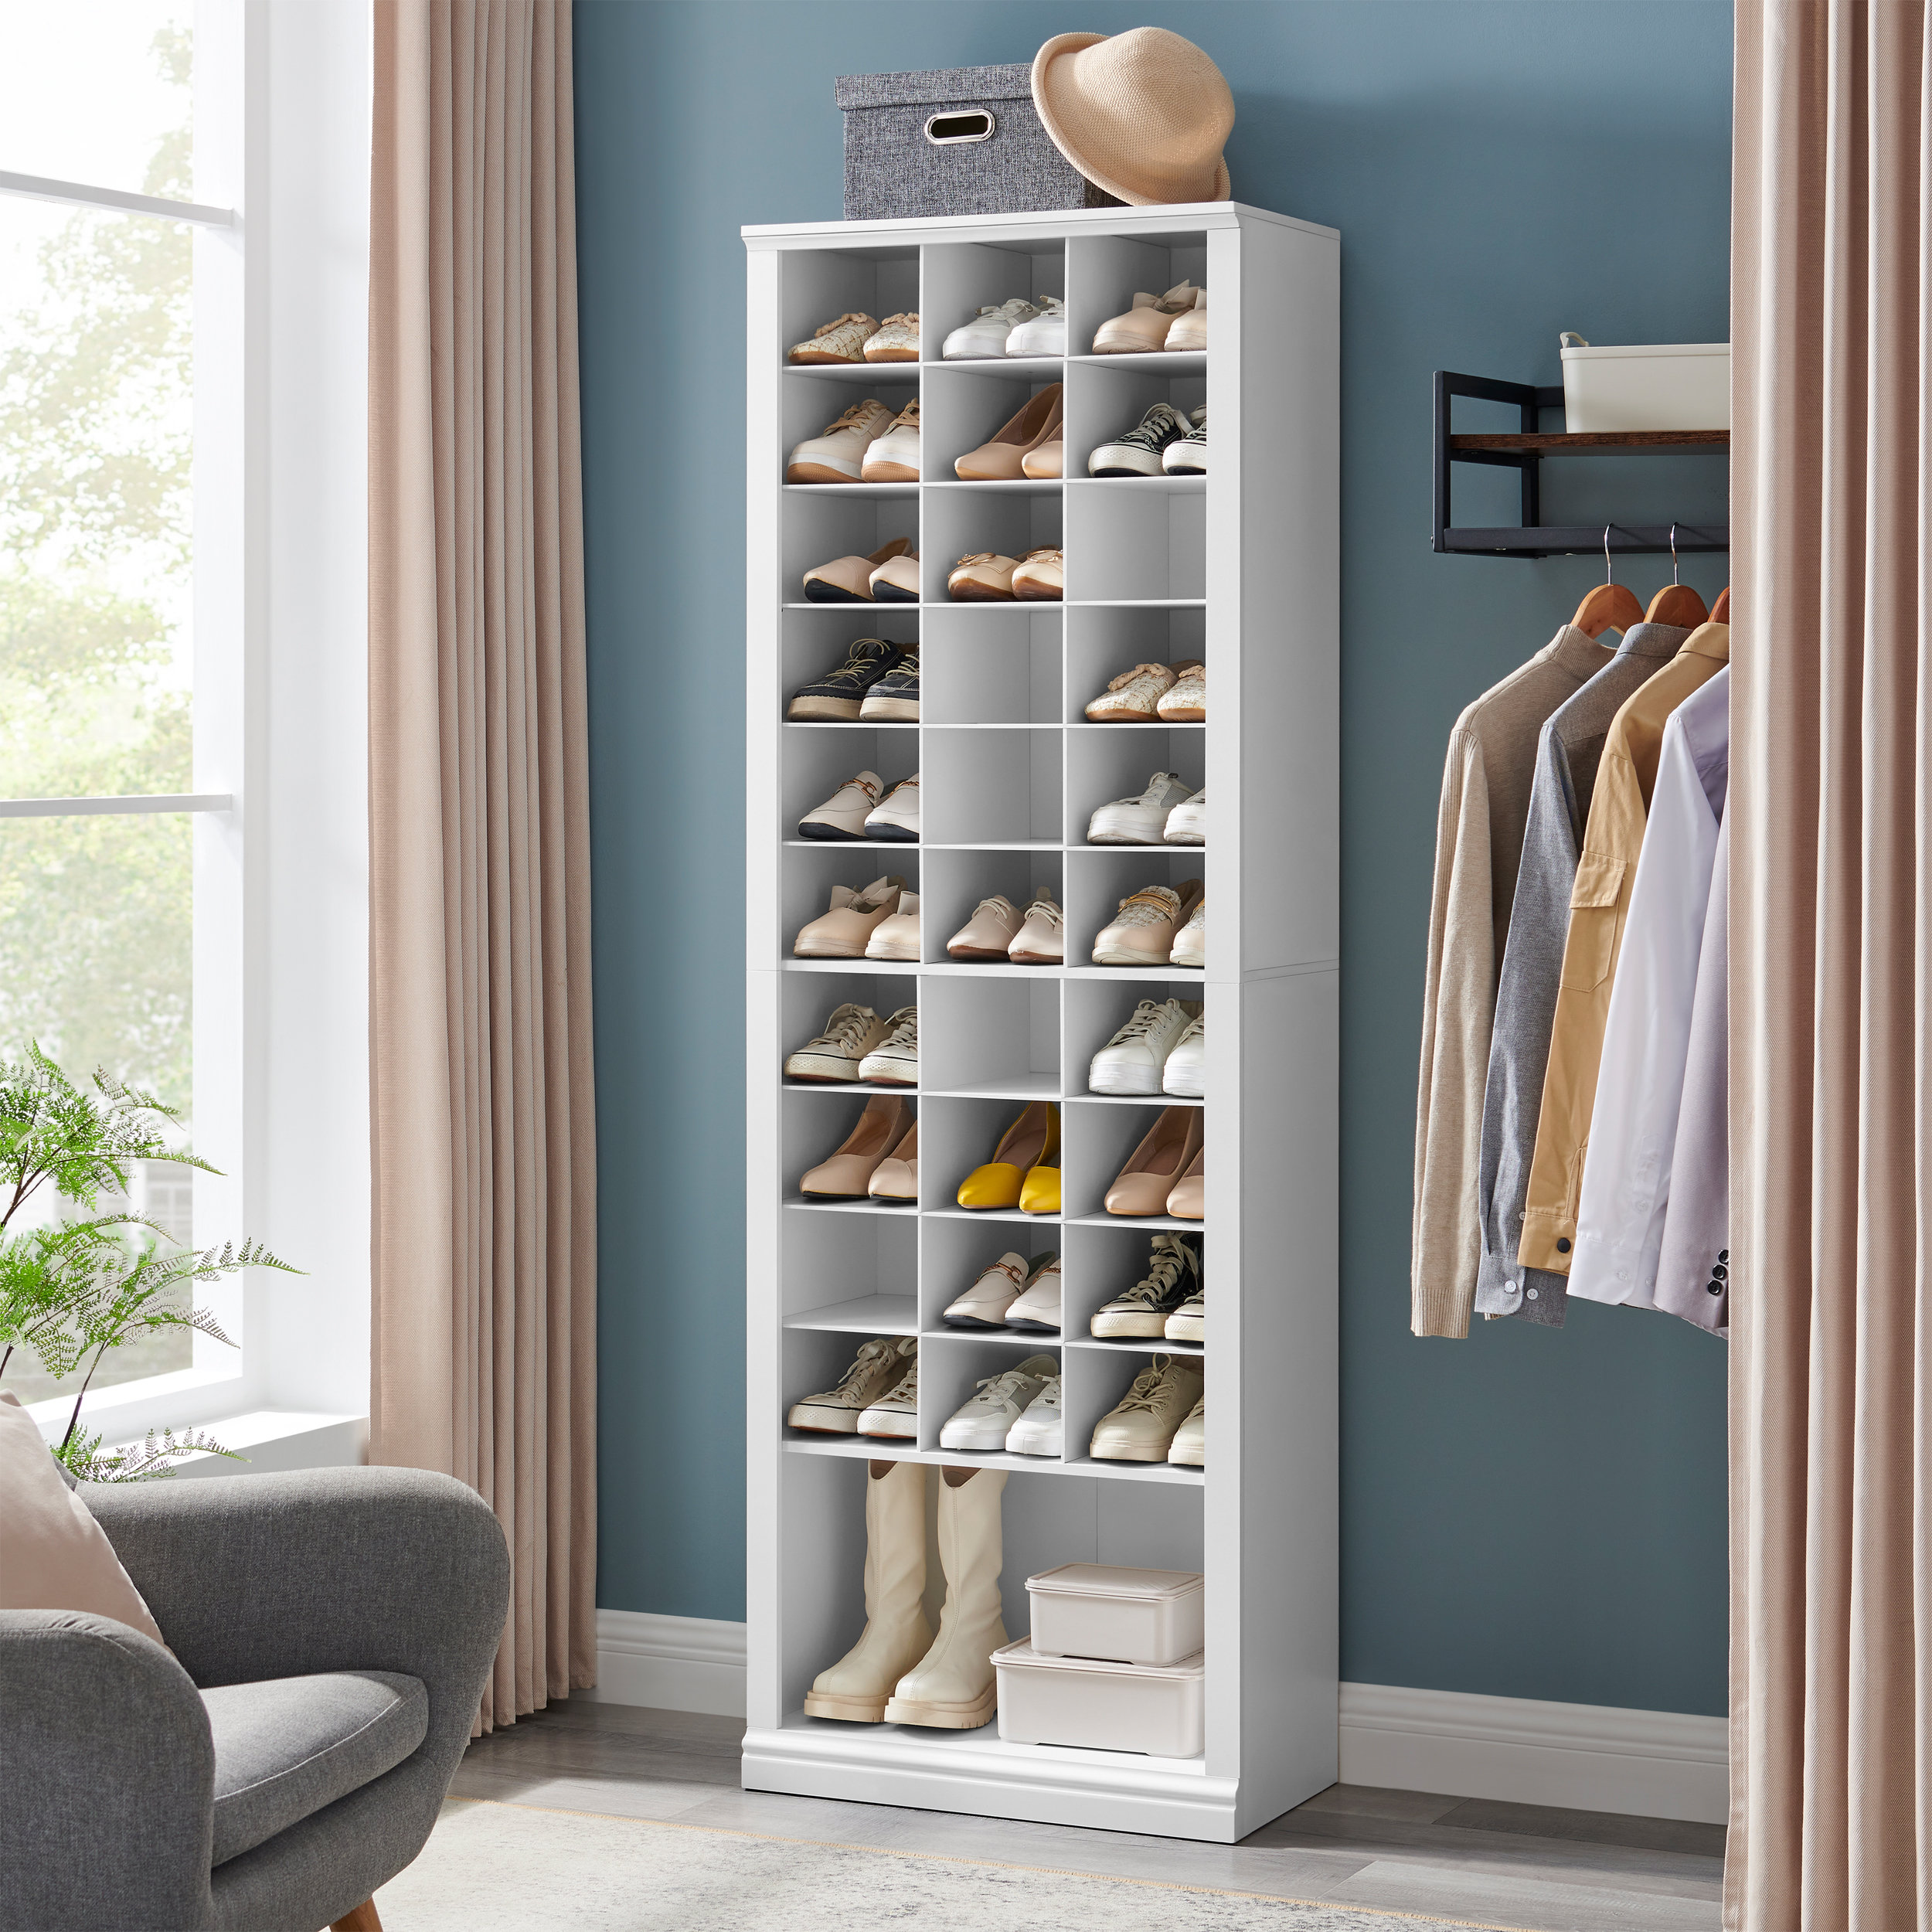 Modular Closets Built-in Closet Tower With Slanted Shoe Shelves - 31.5,  White